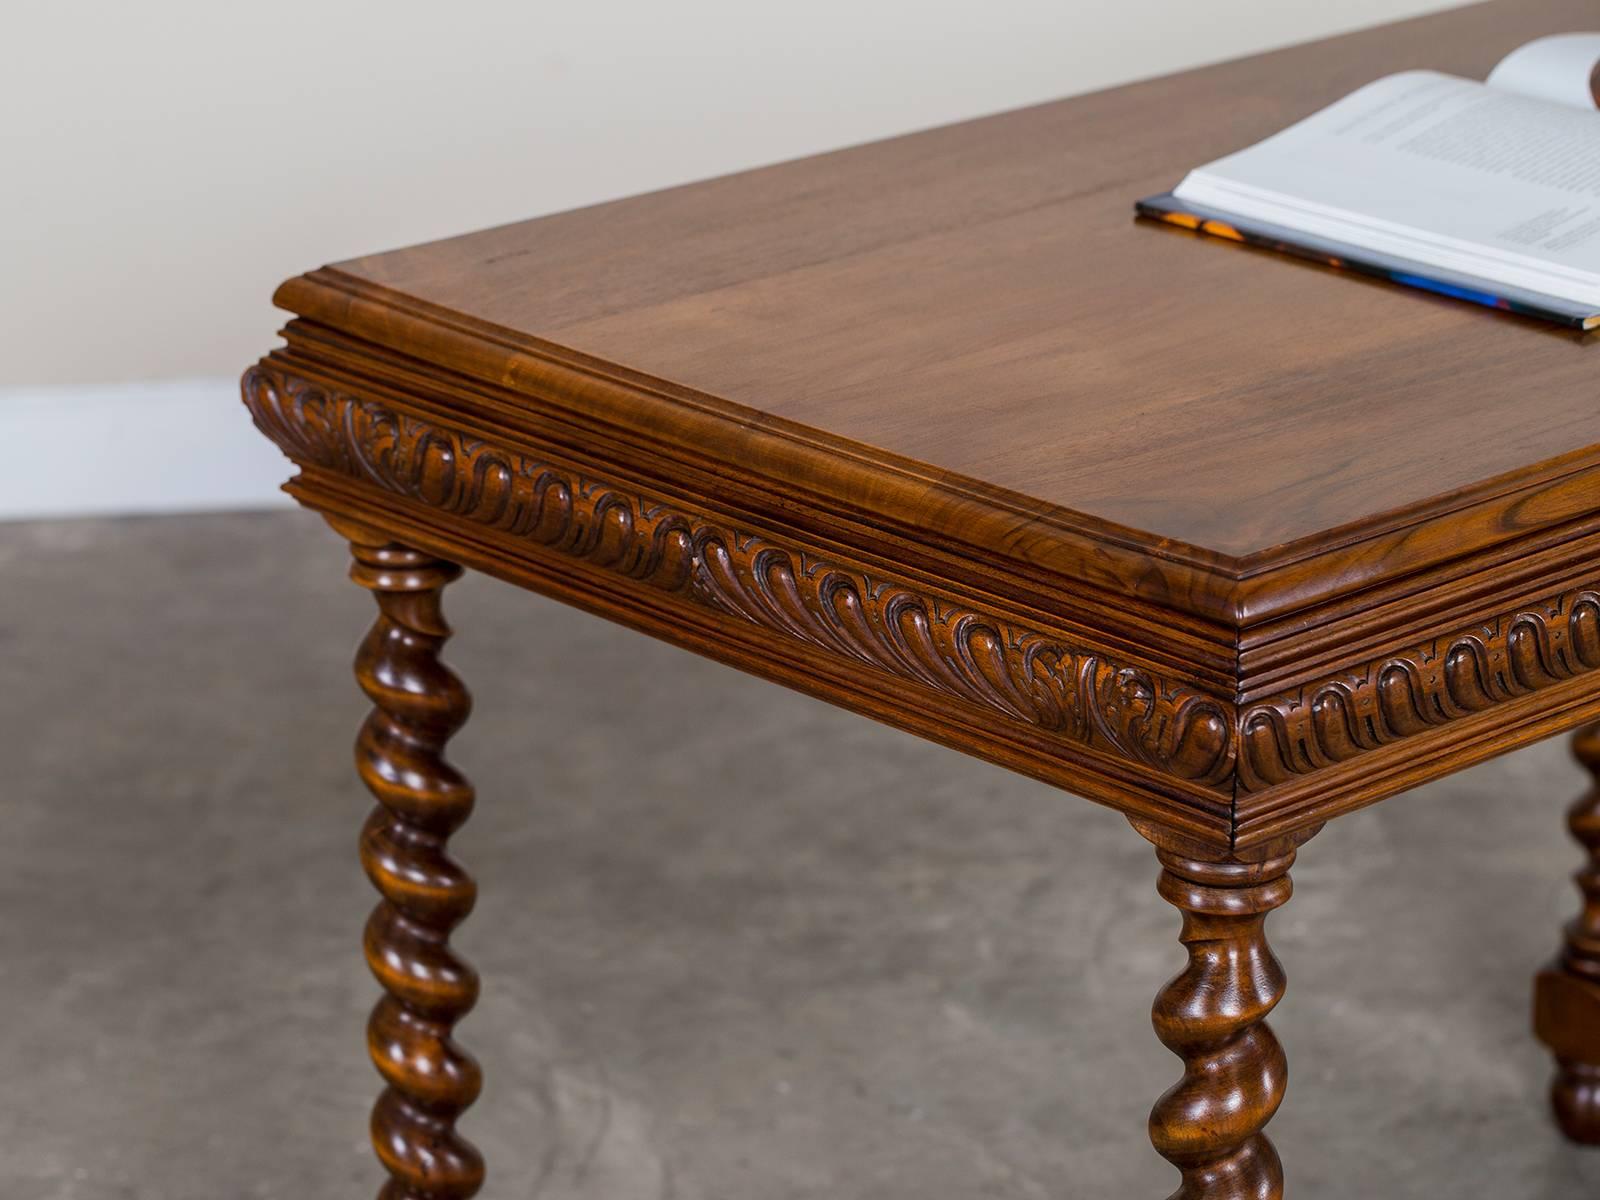 British Colonial Vintage French Henri II Style Walnut Table with Drawer, circa 1920